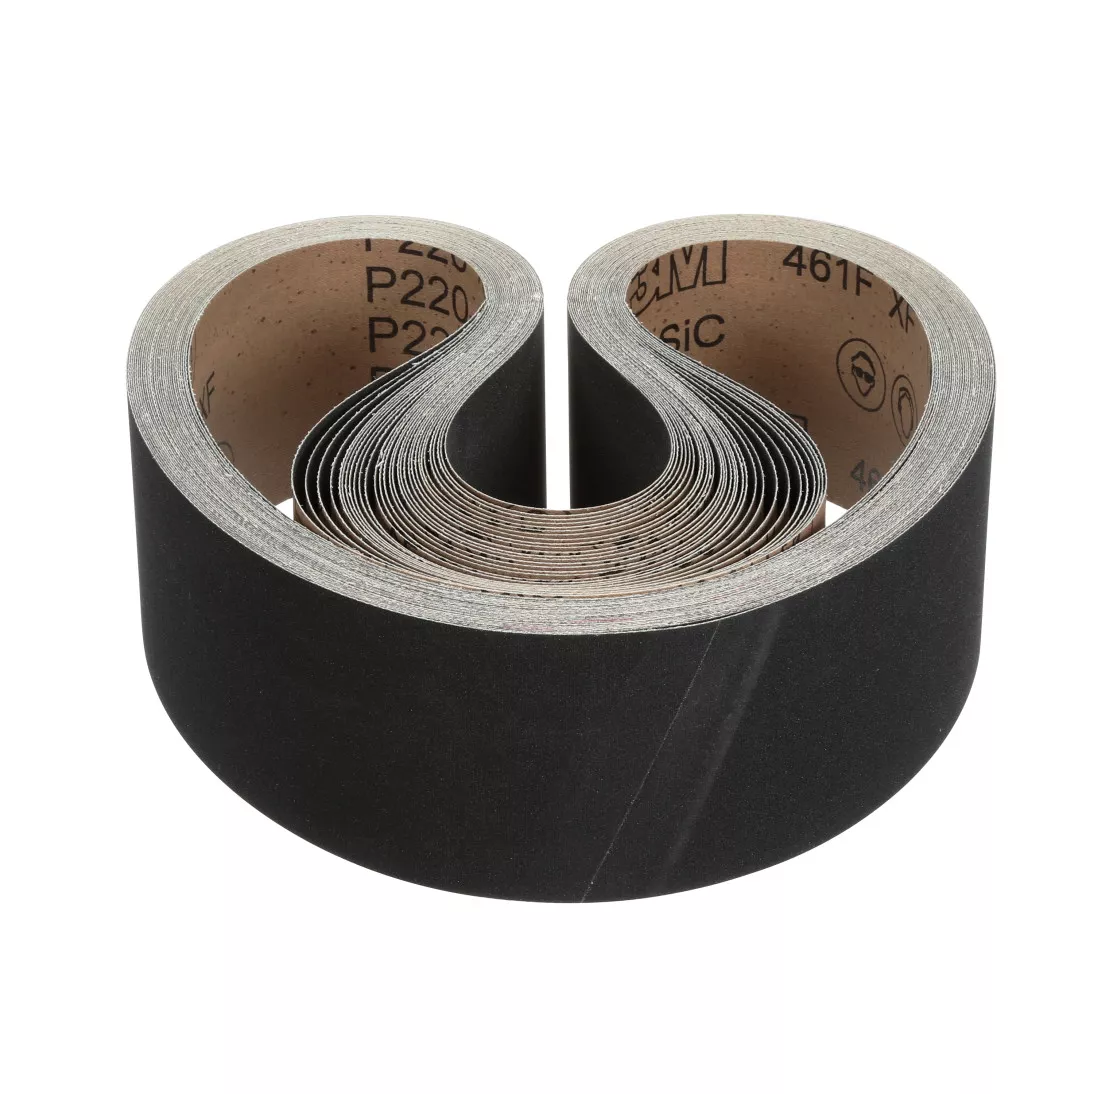 3M™ Cloth Belt 461F, P400 XF-weight, 4 in x 156 in, Sine-lok 45° Angle,
Precision Roll Grinding, 50 ea/Case